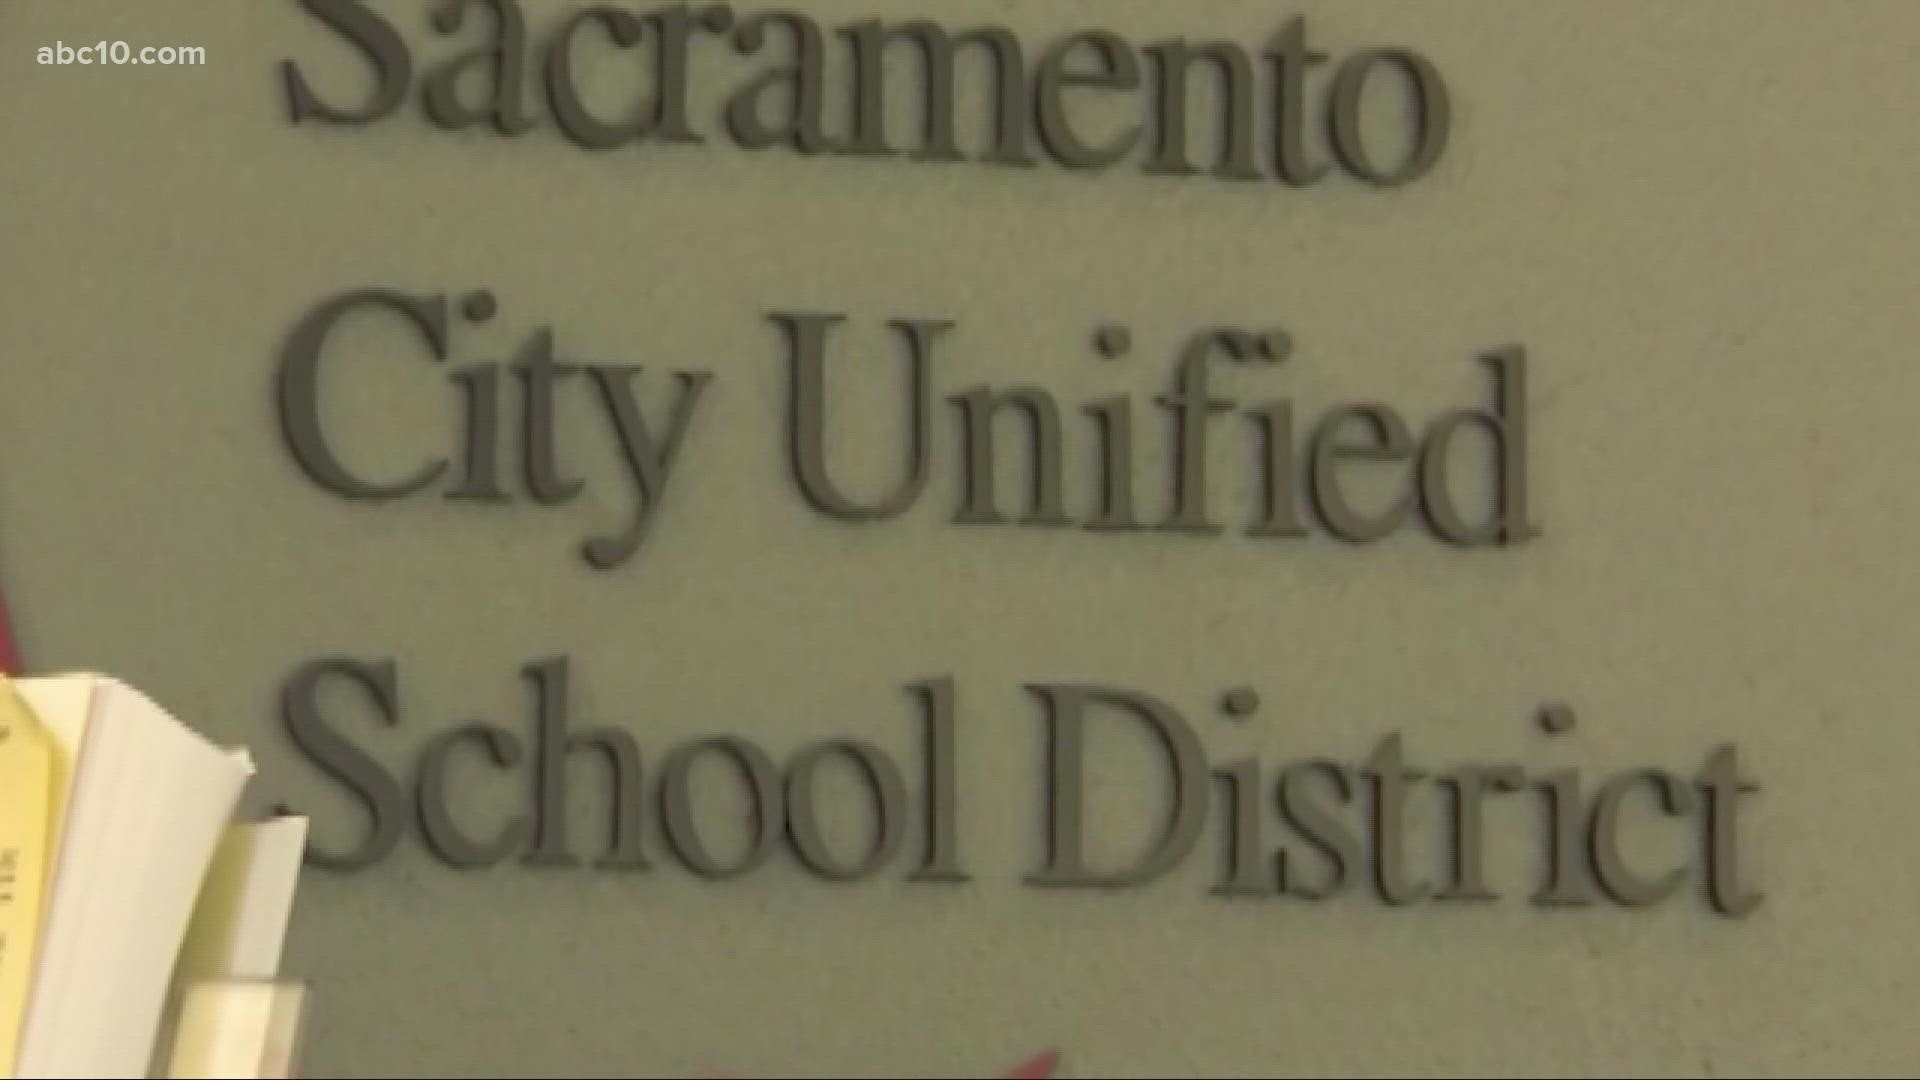 A strike authorization vote has been announced Thursday night that would impact teachers and schools in the Sacramento area.